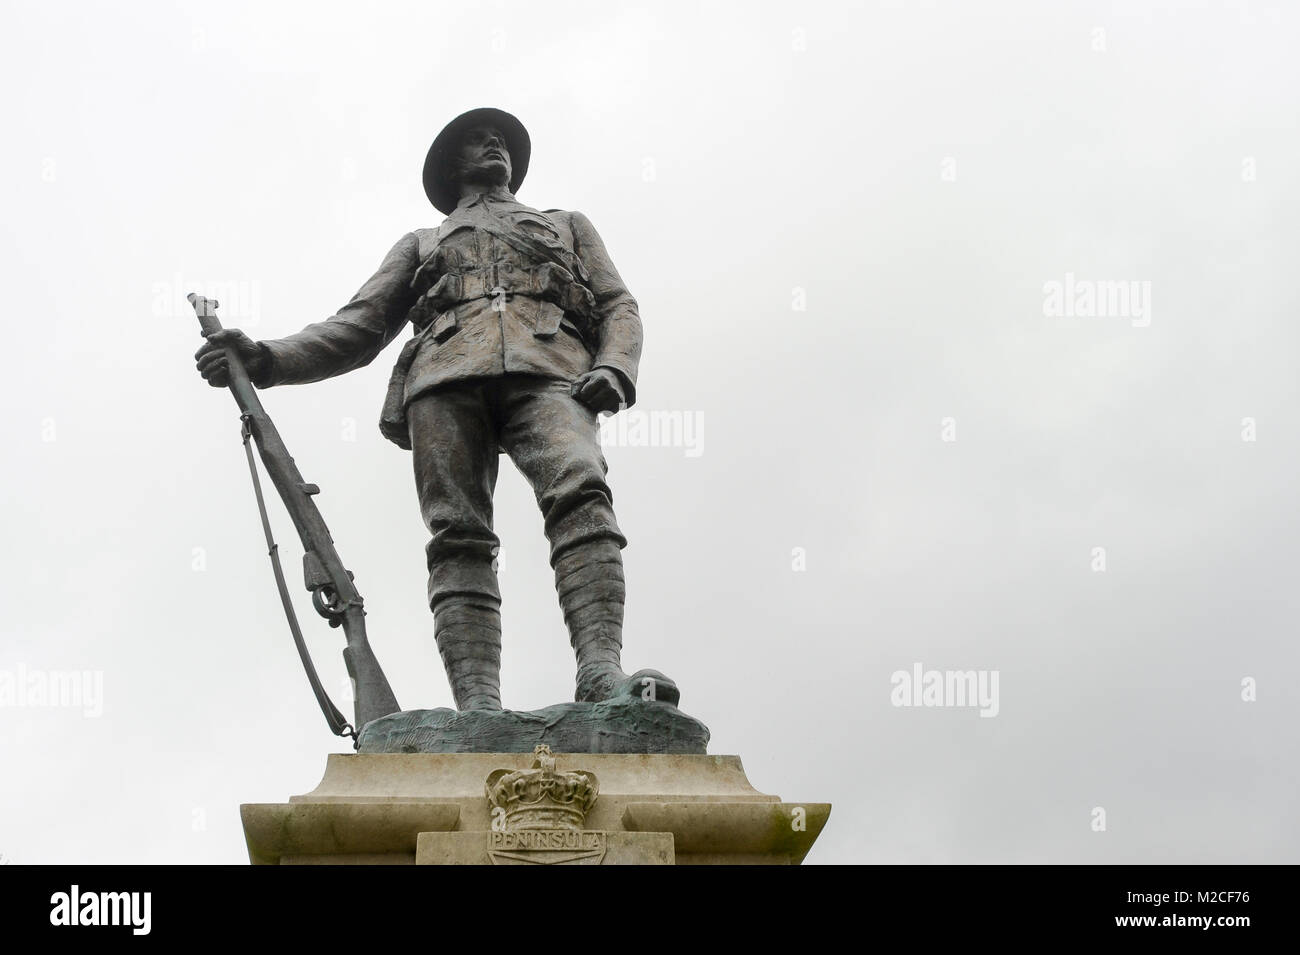 King's Royal Rifle Corps Memorial from 1922 by John Tweedt in Historic Centre of Winchester, Hampshire, England, United Kingdom. 3rd April 2015 © Wojc Stock Photo